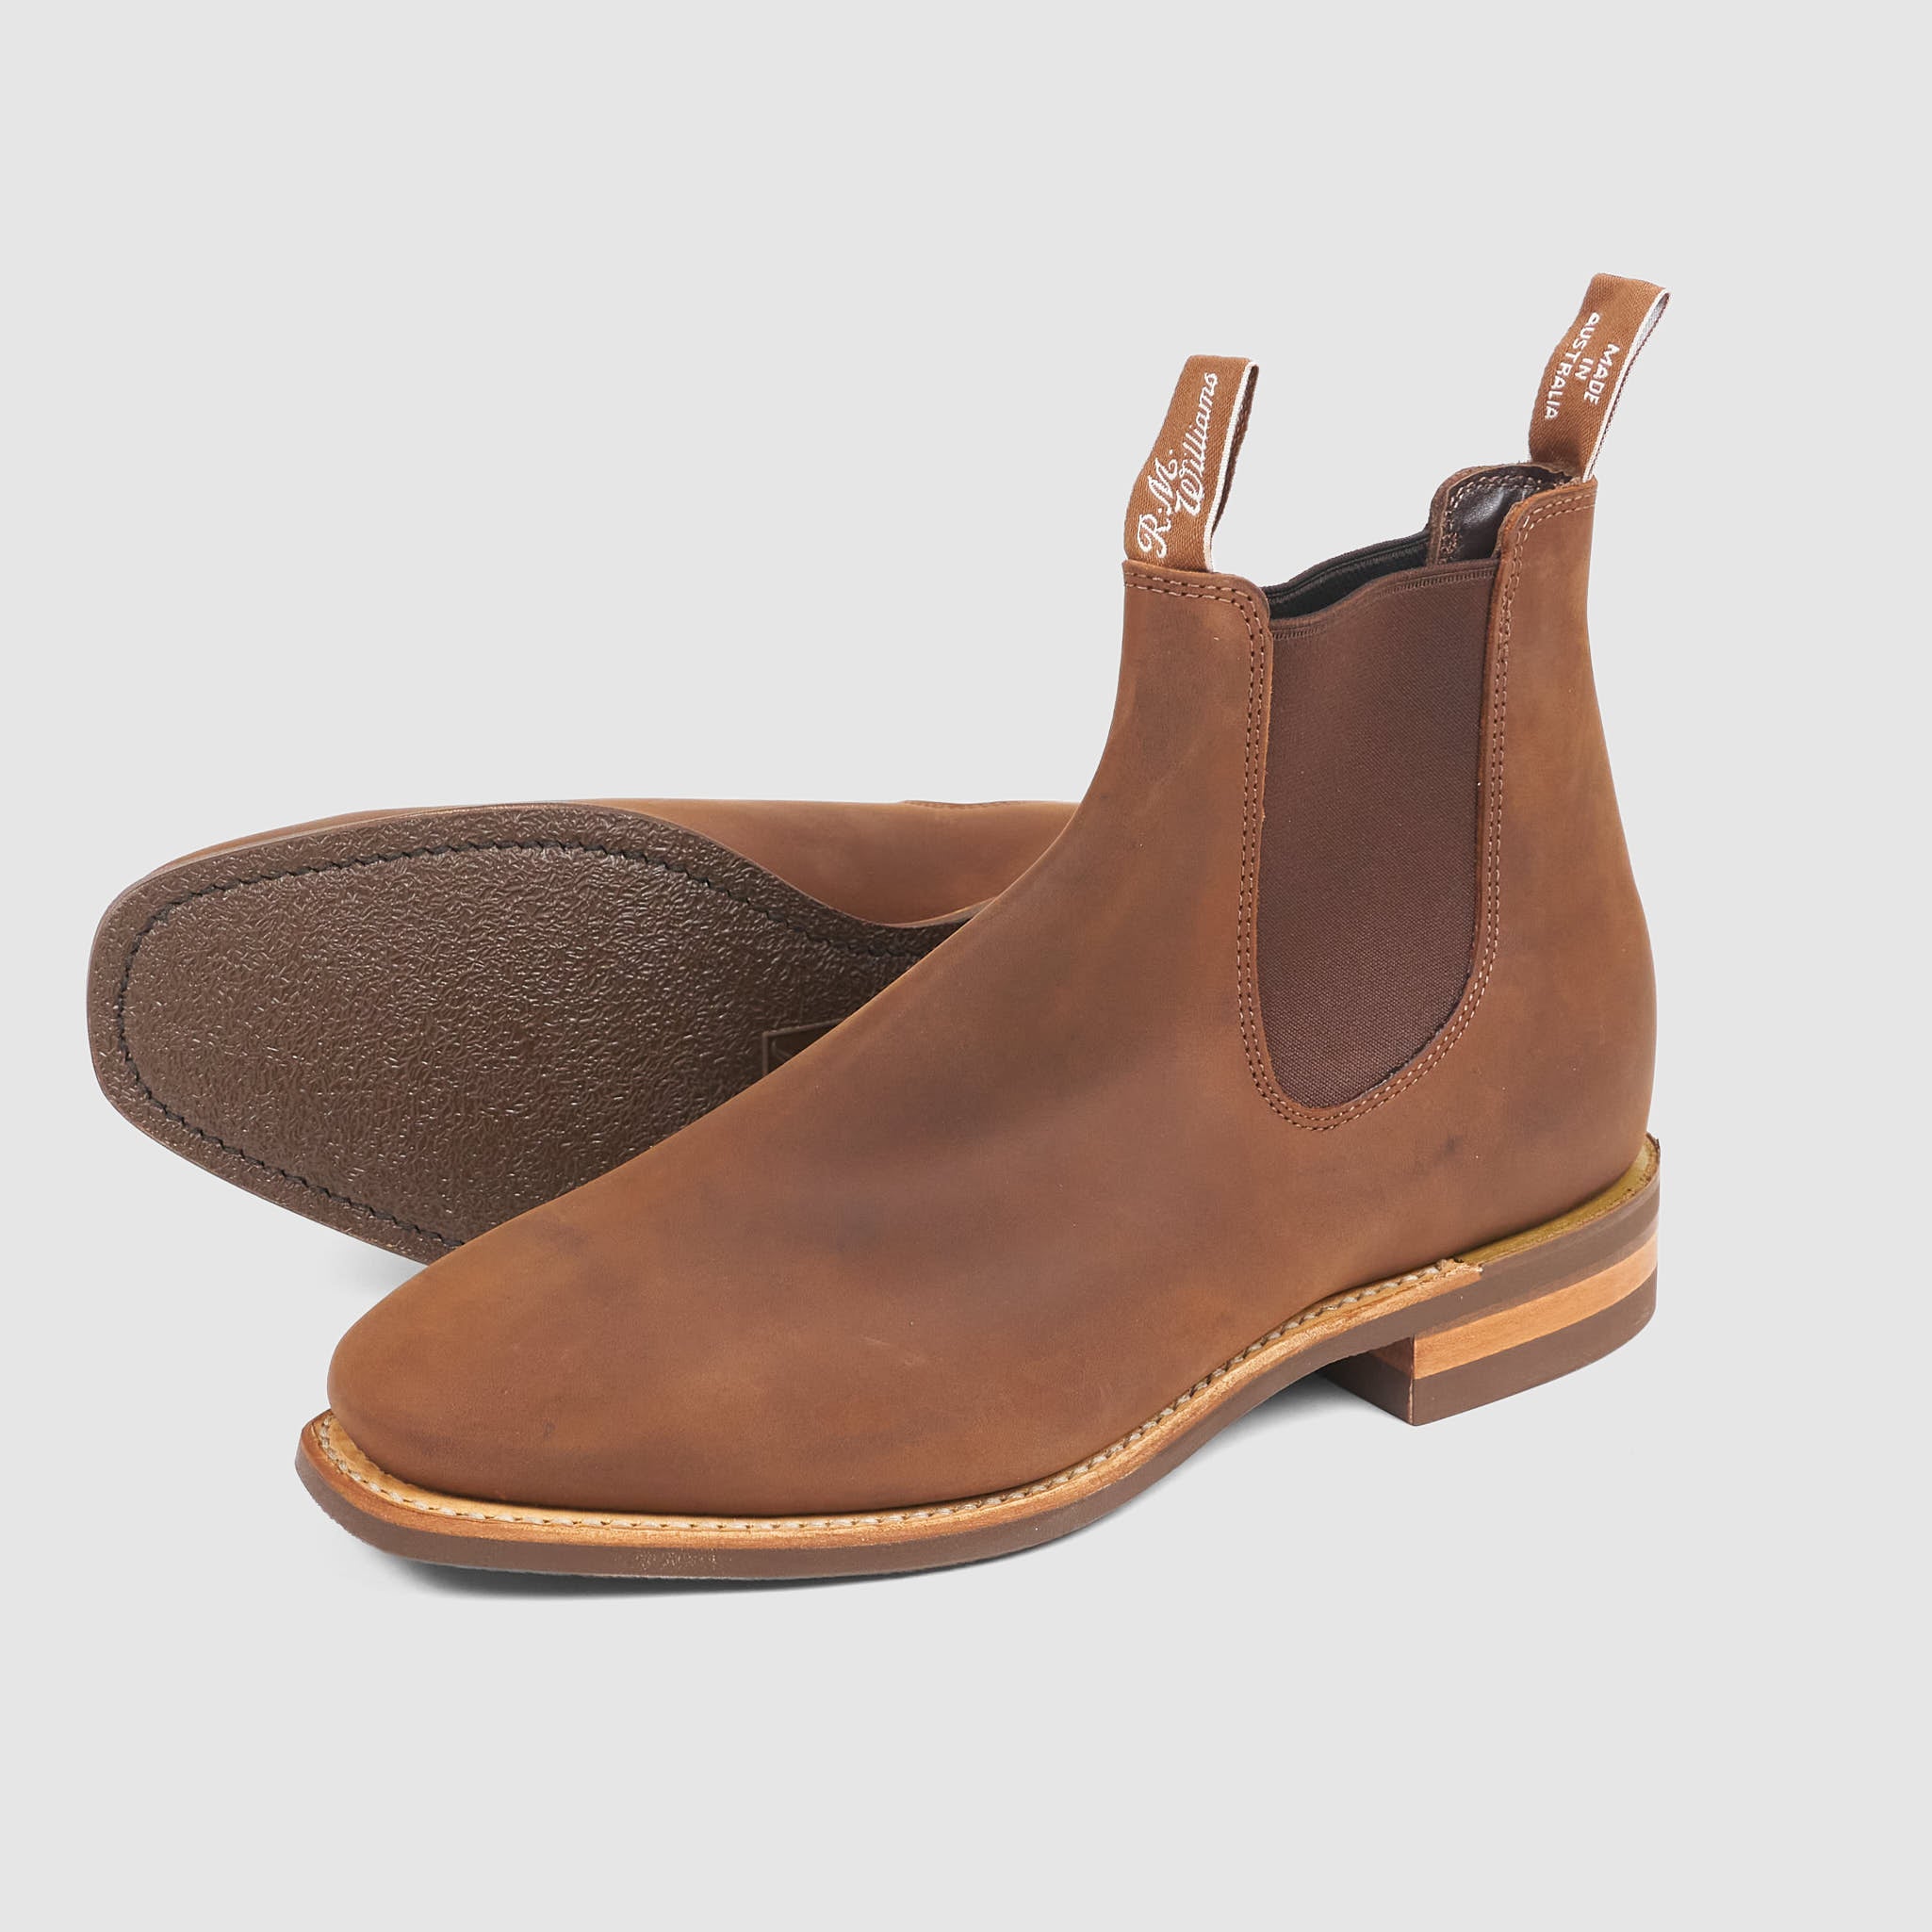 RM Williams 7.5 Comfort Craftsman Brown Leather Slip-On Chelsea Boots